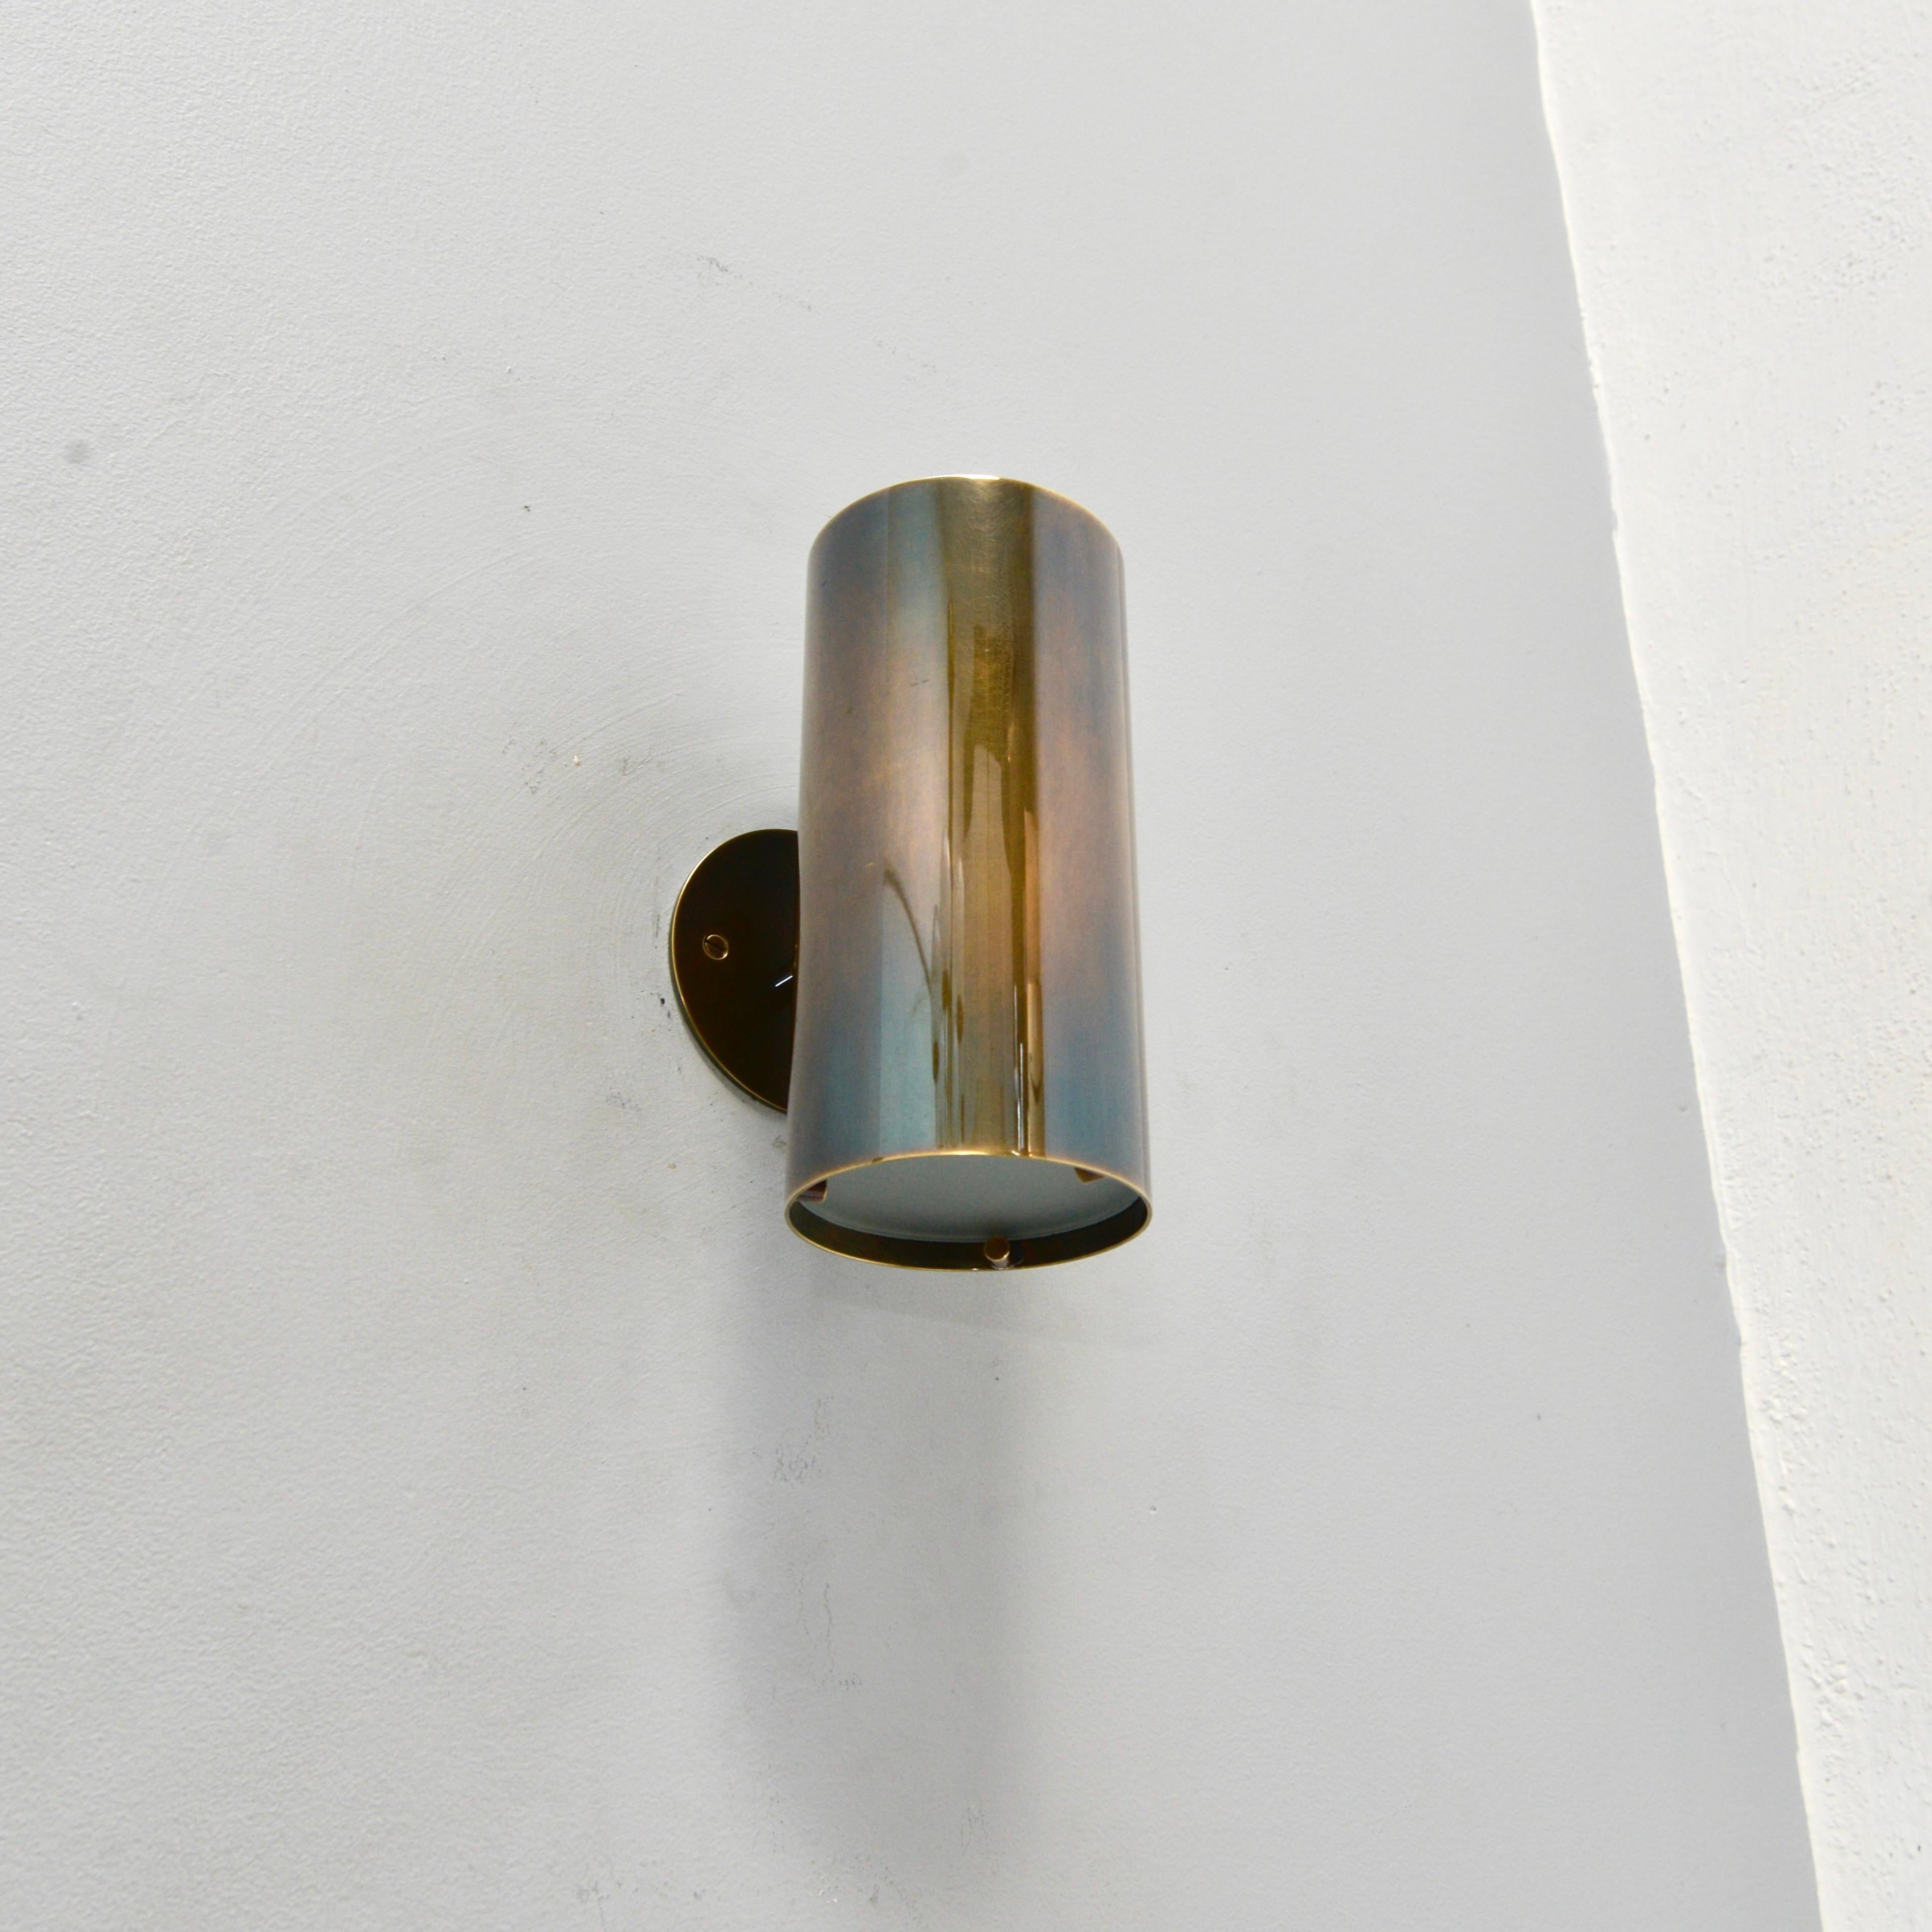 The elegant outdoor LUTE UD Sconce is an all brass wall sconce inspired by mid century Italian design. This variation of our LUTE OD sconce is an up-down version with illumination exiting both top and bottom of the sconce through a frosted glass